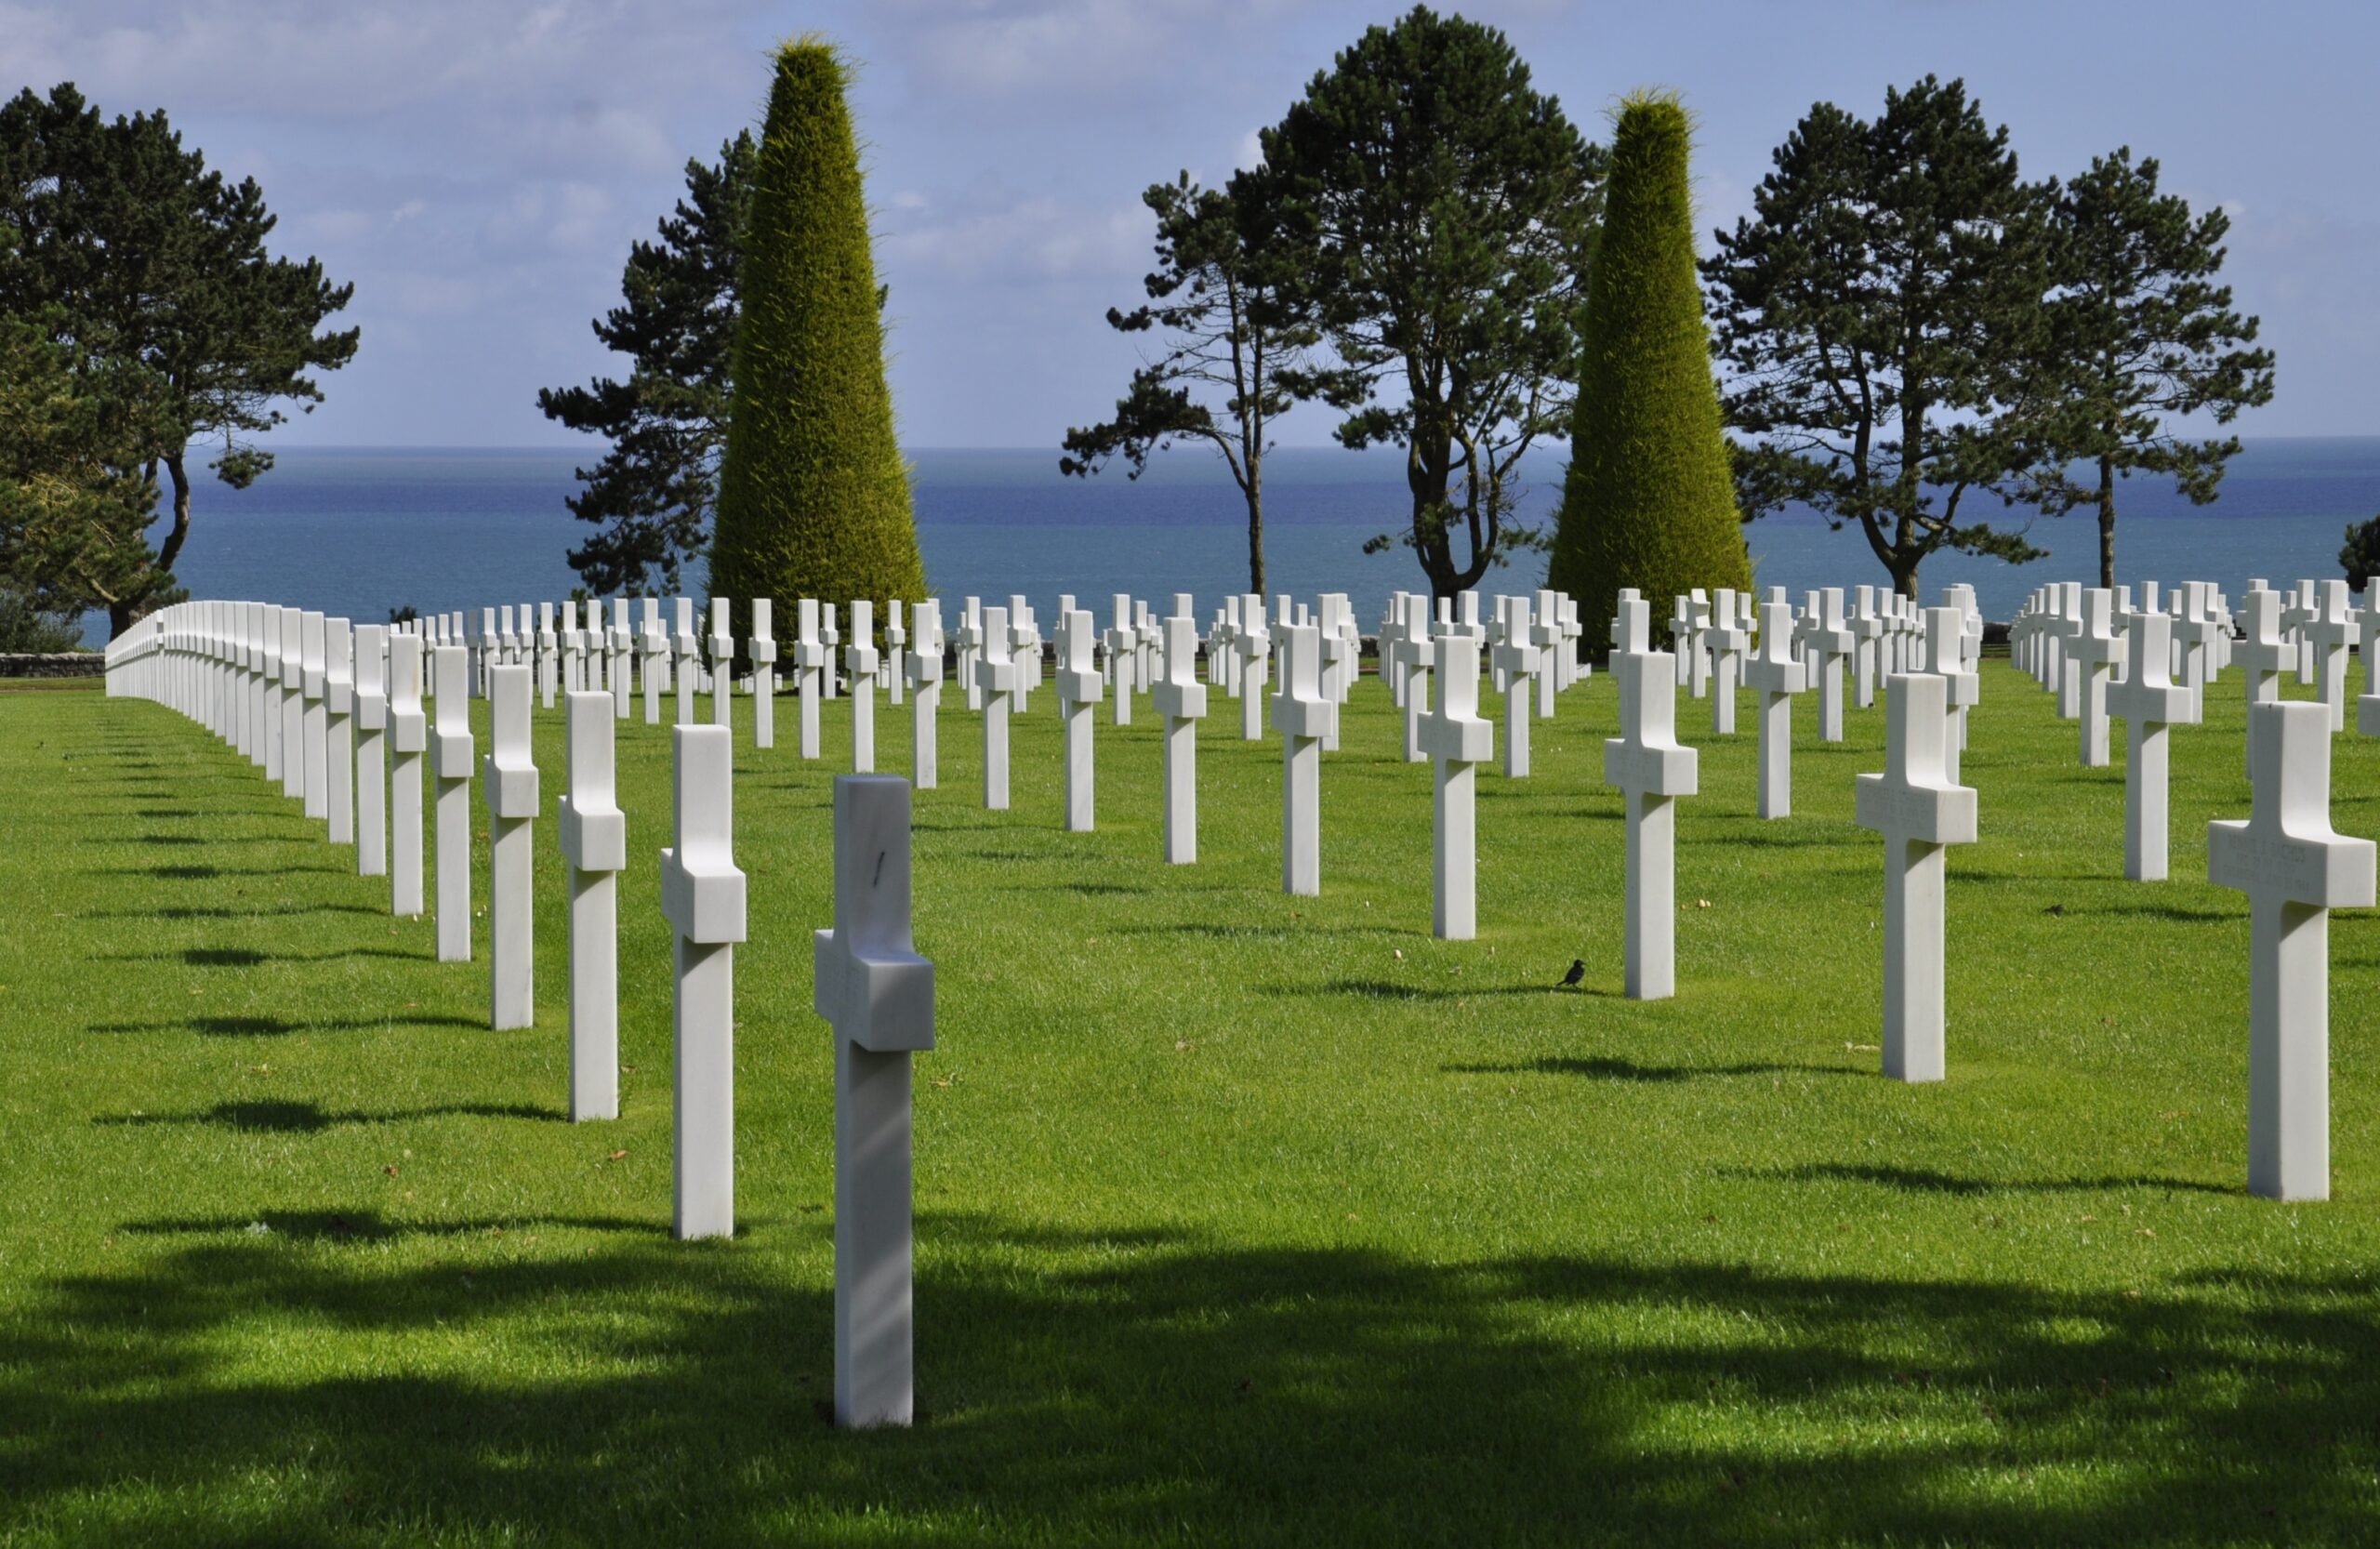 d-day landing beaches and memorials must-see normandy for history buffs